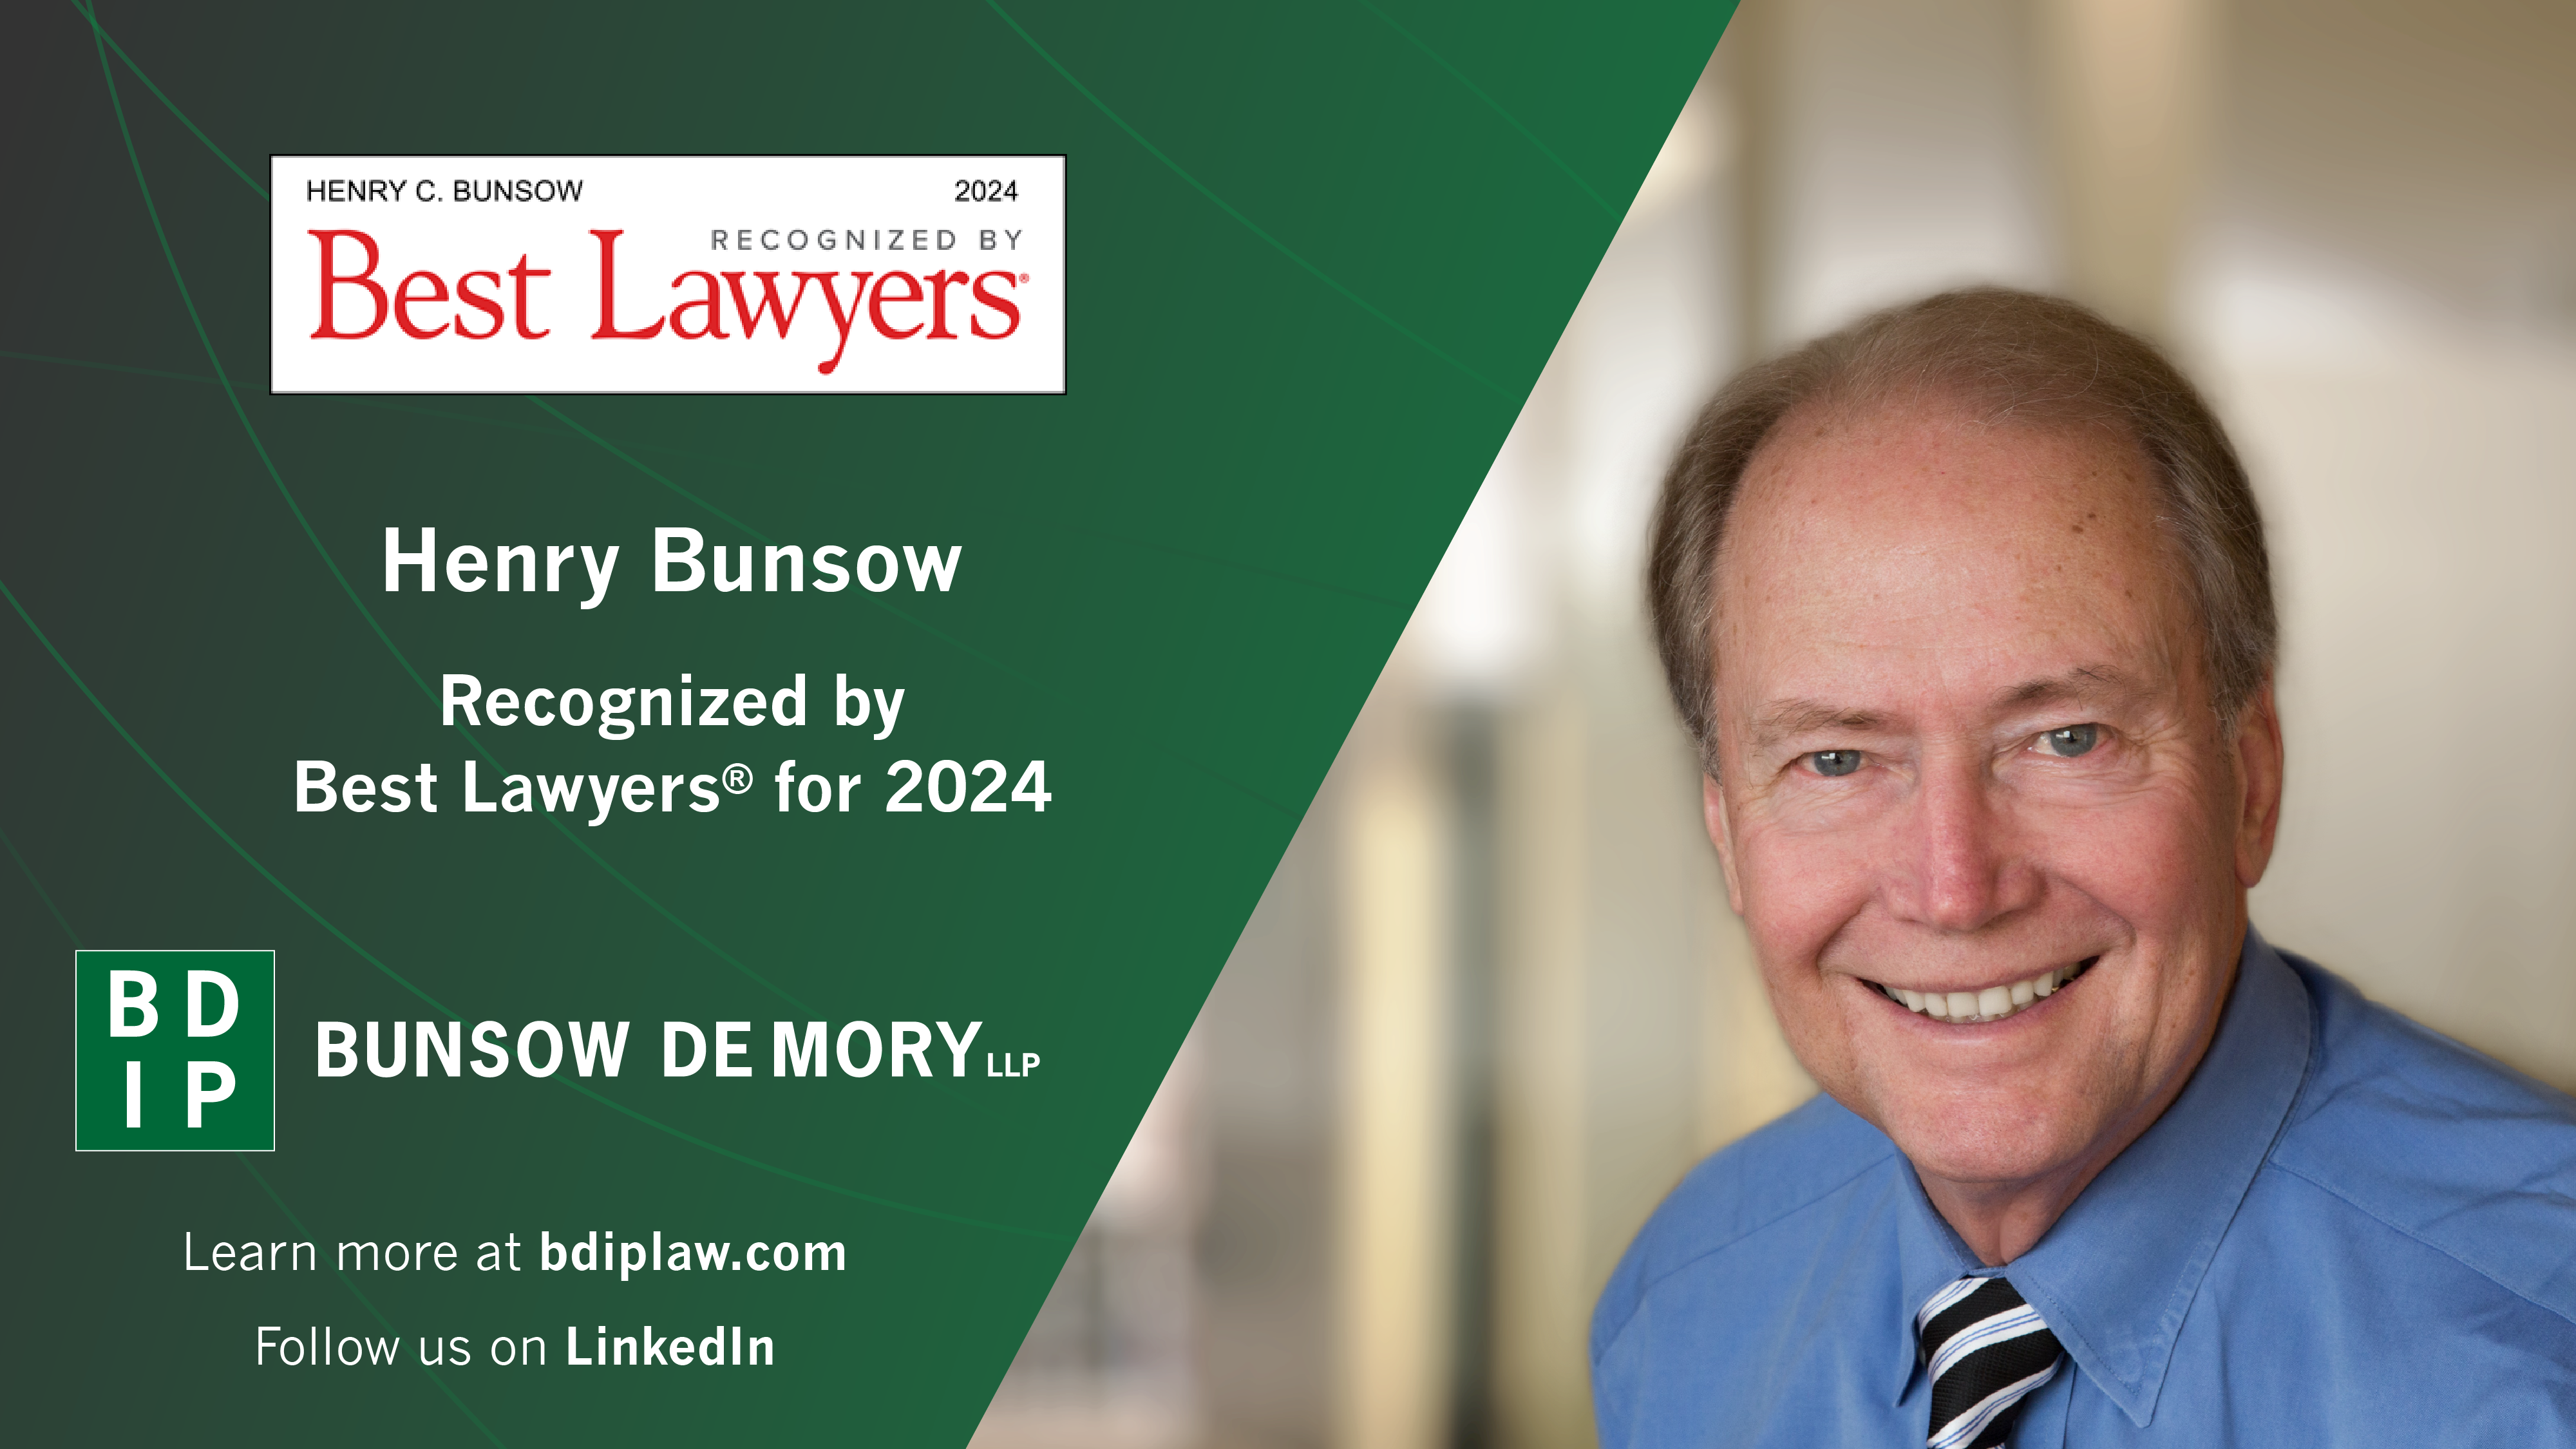 Henry Bunsow Recognized by Best Lawyers for 2024